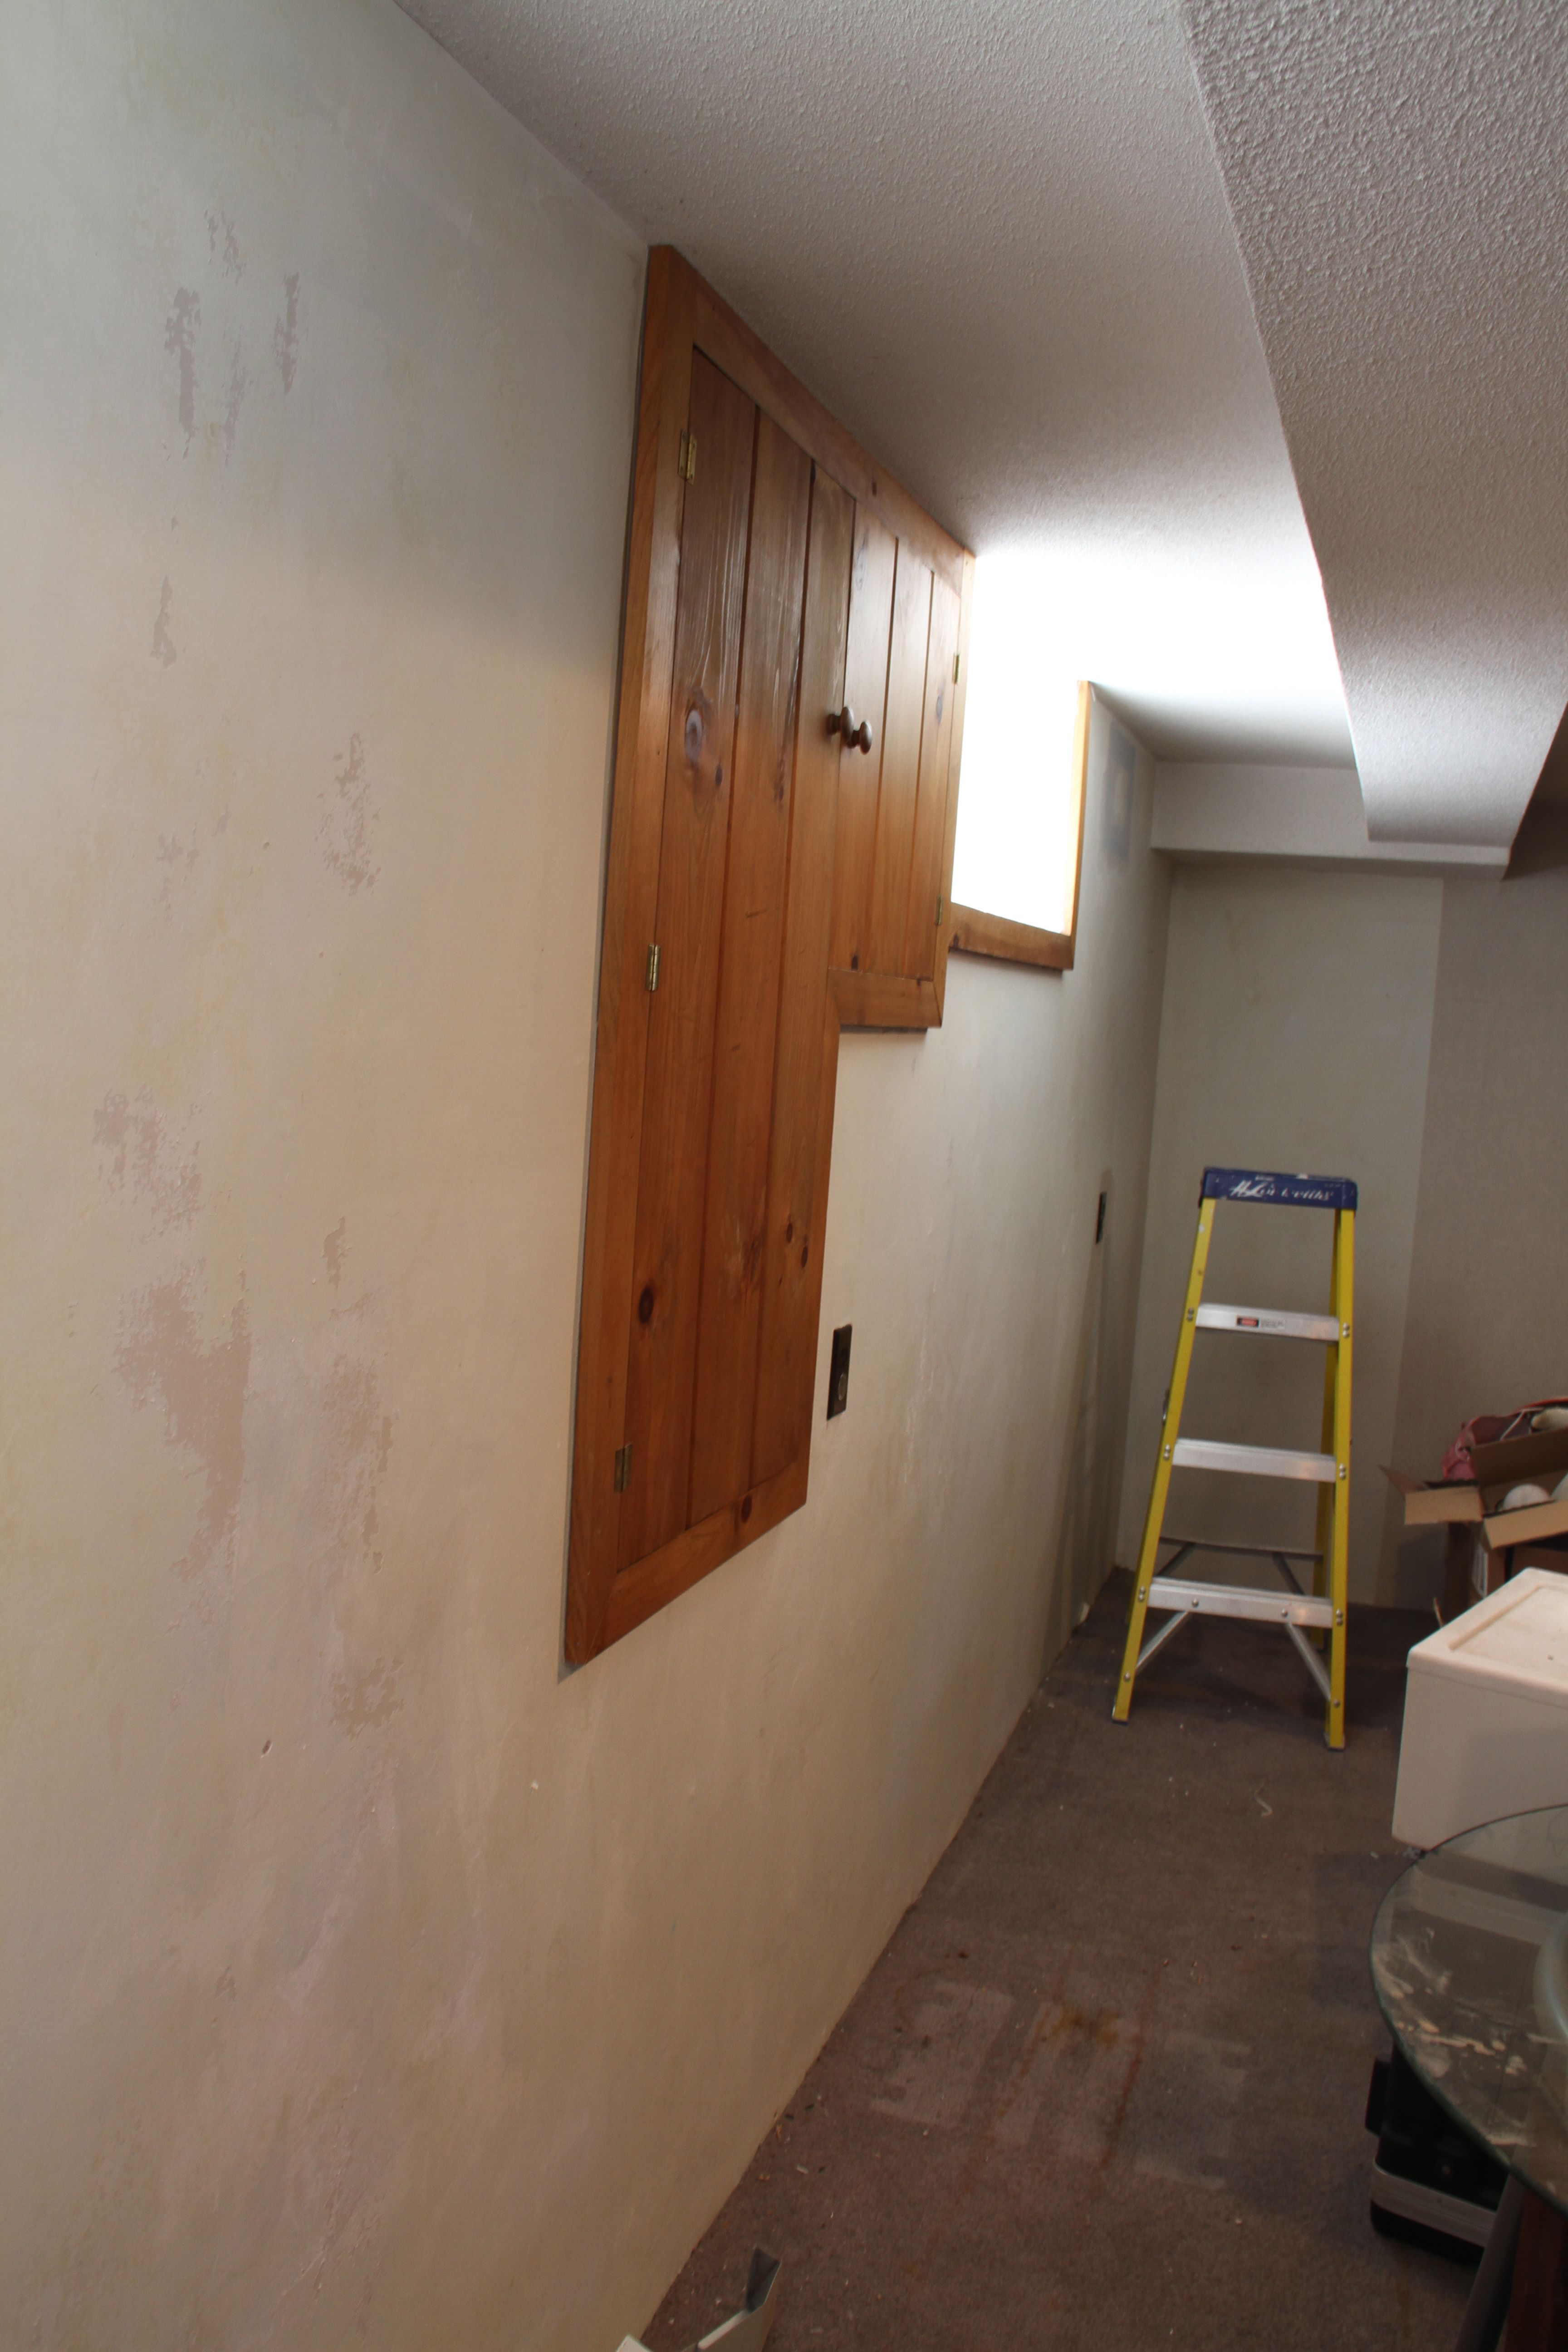 The walls are not smooth like brand new drywall. The wallpaper had been put directly onto unprimed sheetrock making the glue virtually impossible to remove with a chemical.